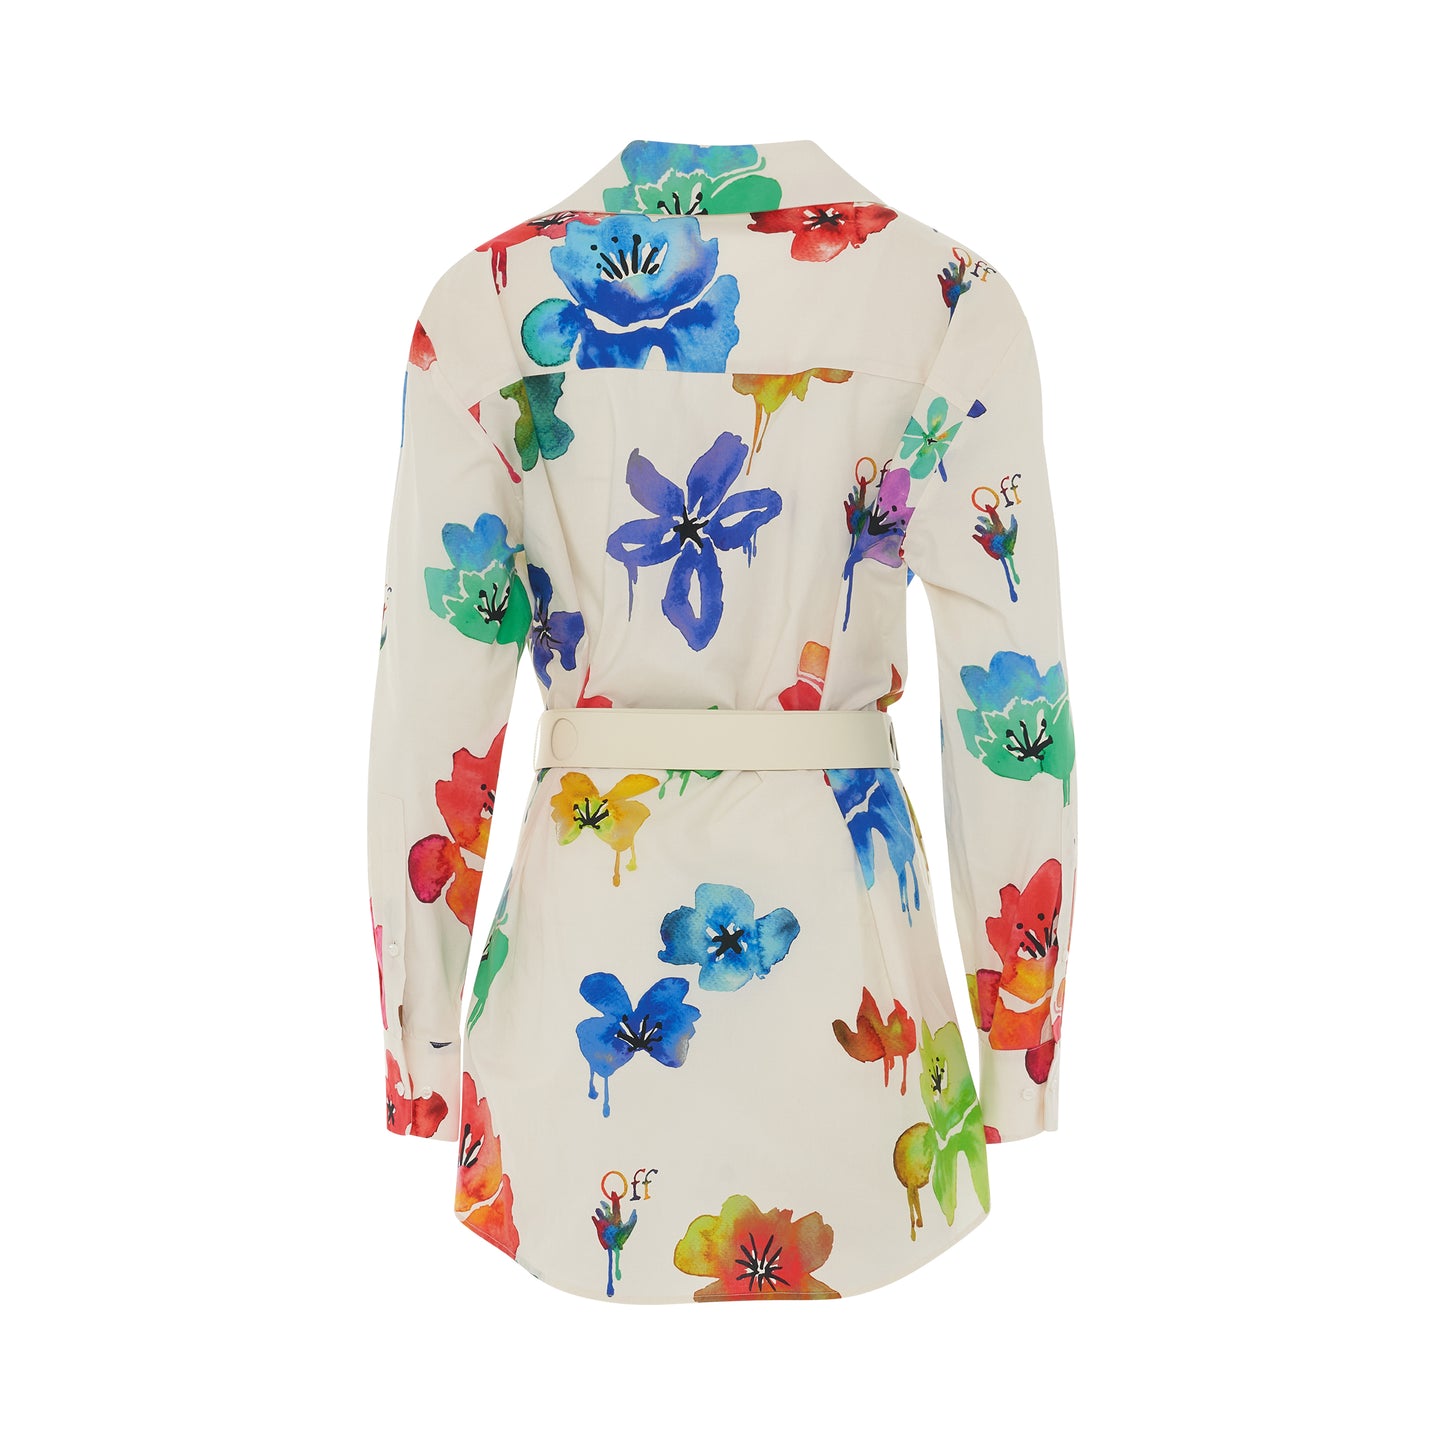 Floral Pop Belted Shirt in Sand/Multi